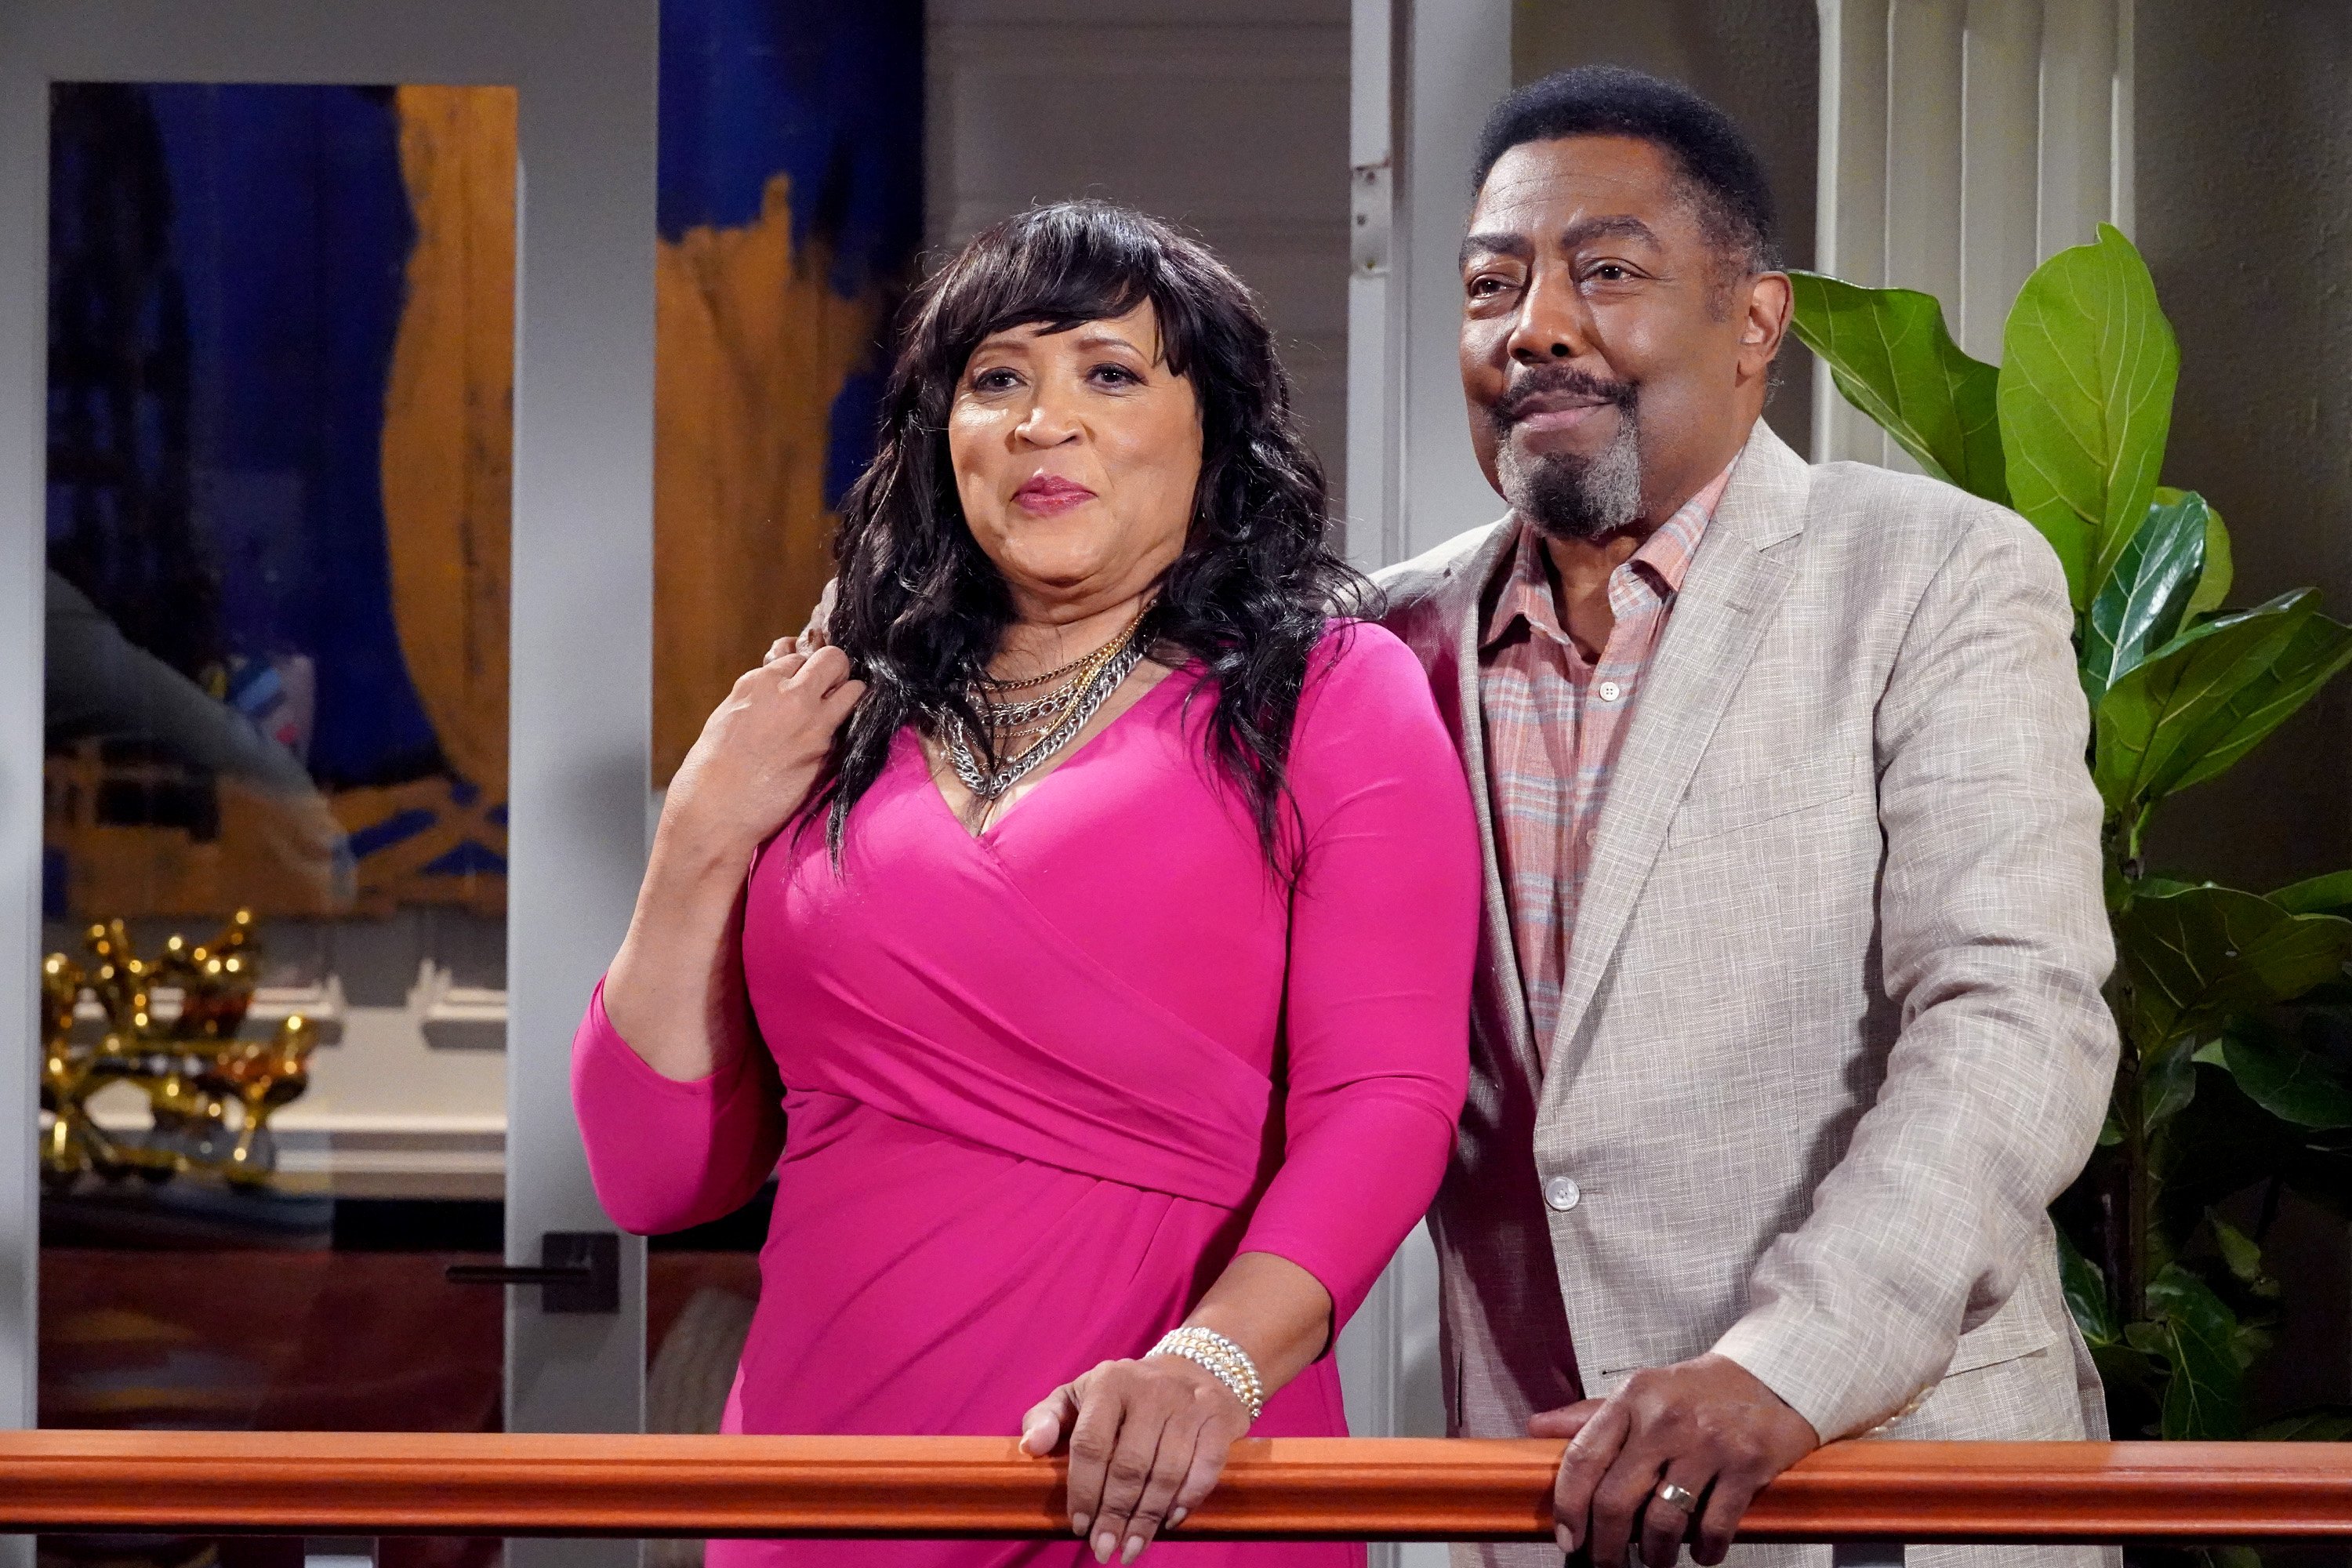 'Days of Our Lives' stars Jackee Harry and James Reynolds in a scene from the NBC soap opera.